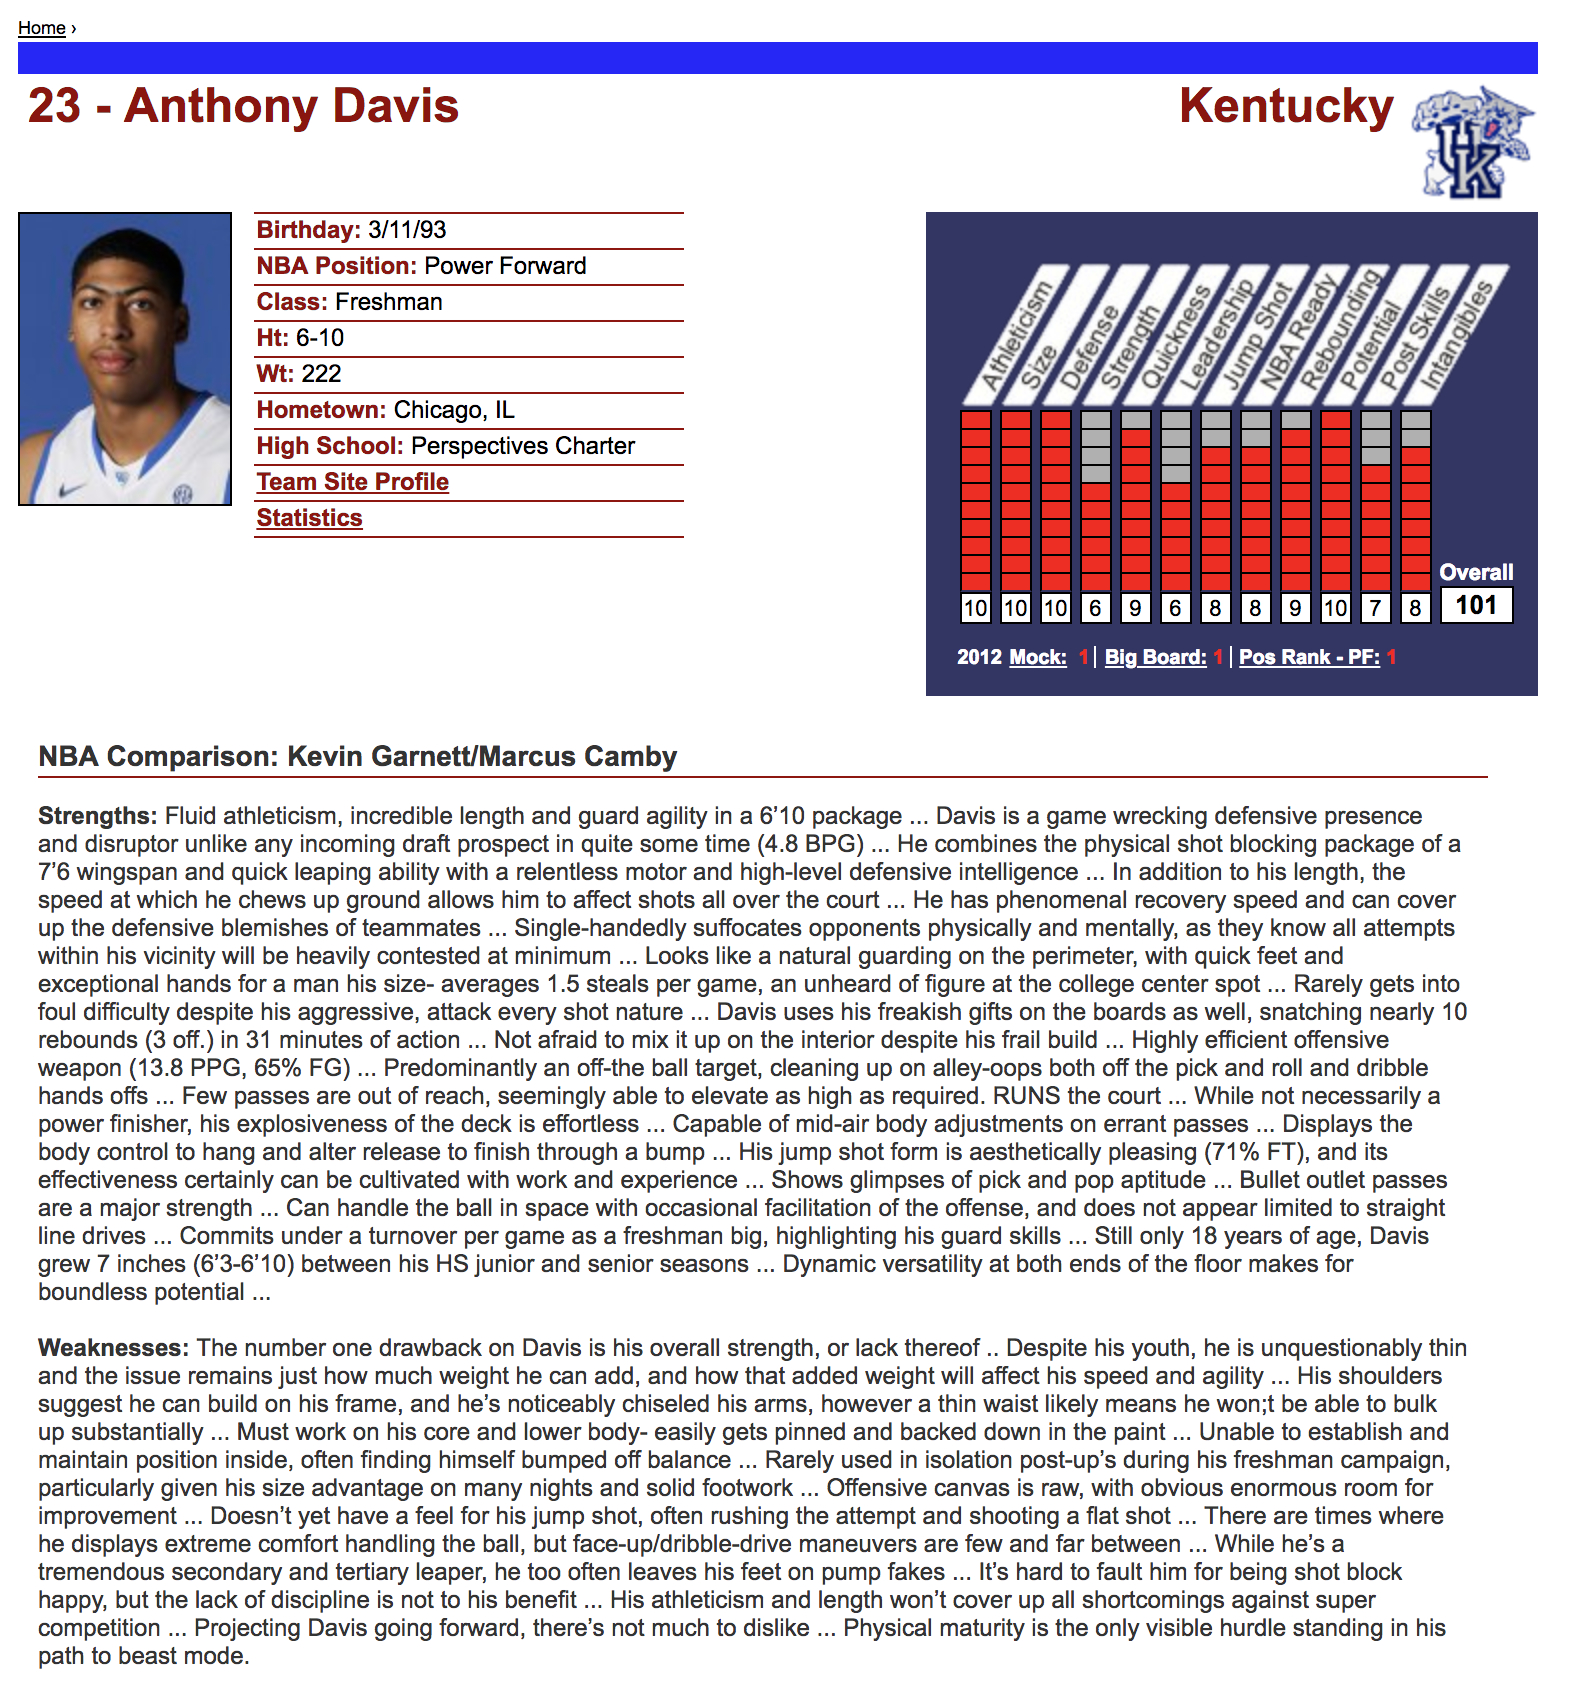 My Model Monday: Nba Draft Scouting Text Analysis | Model 284 Within Basketball Player Scouting Report Template